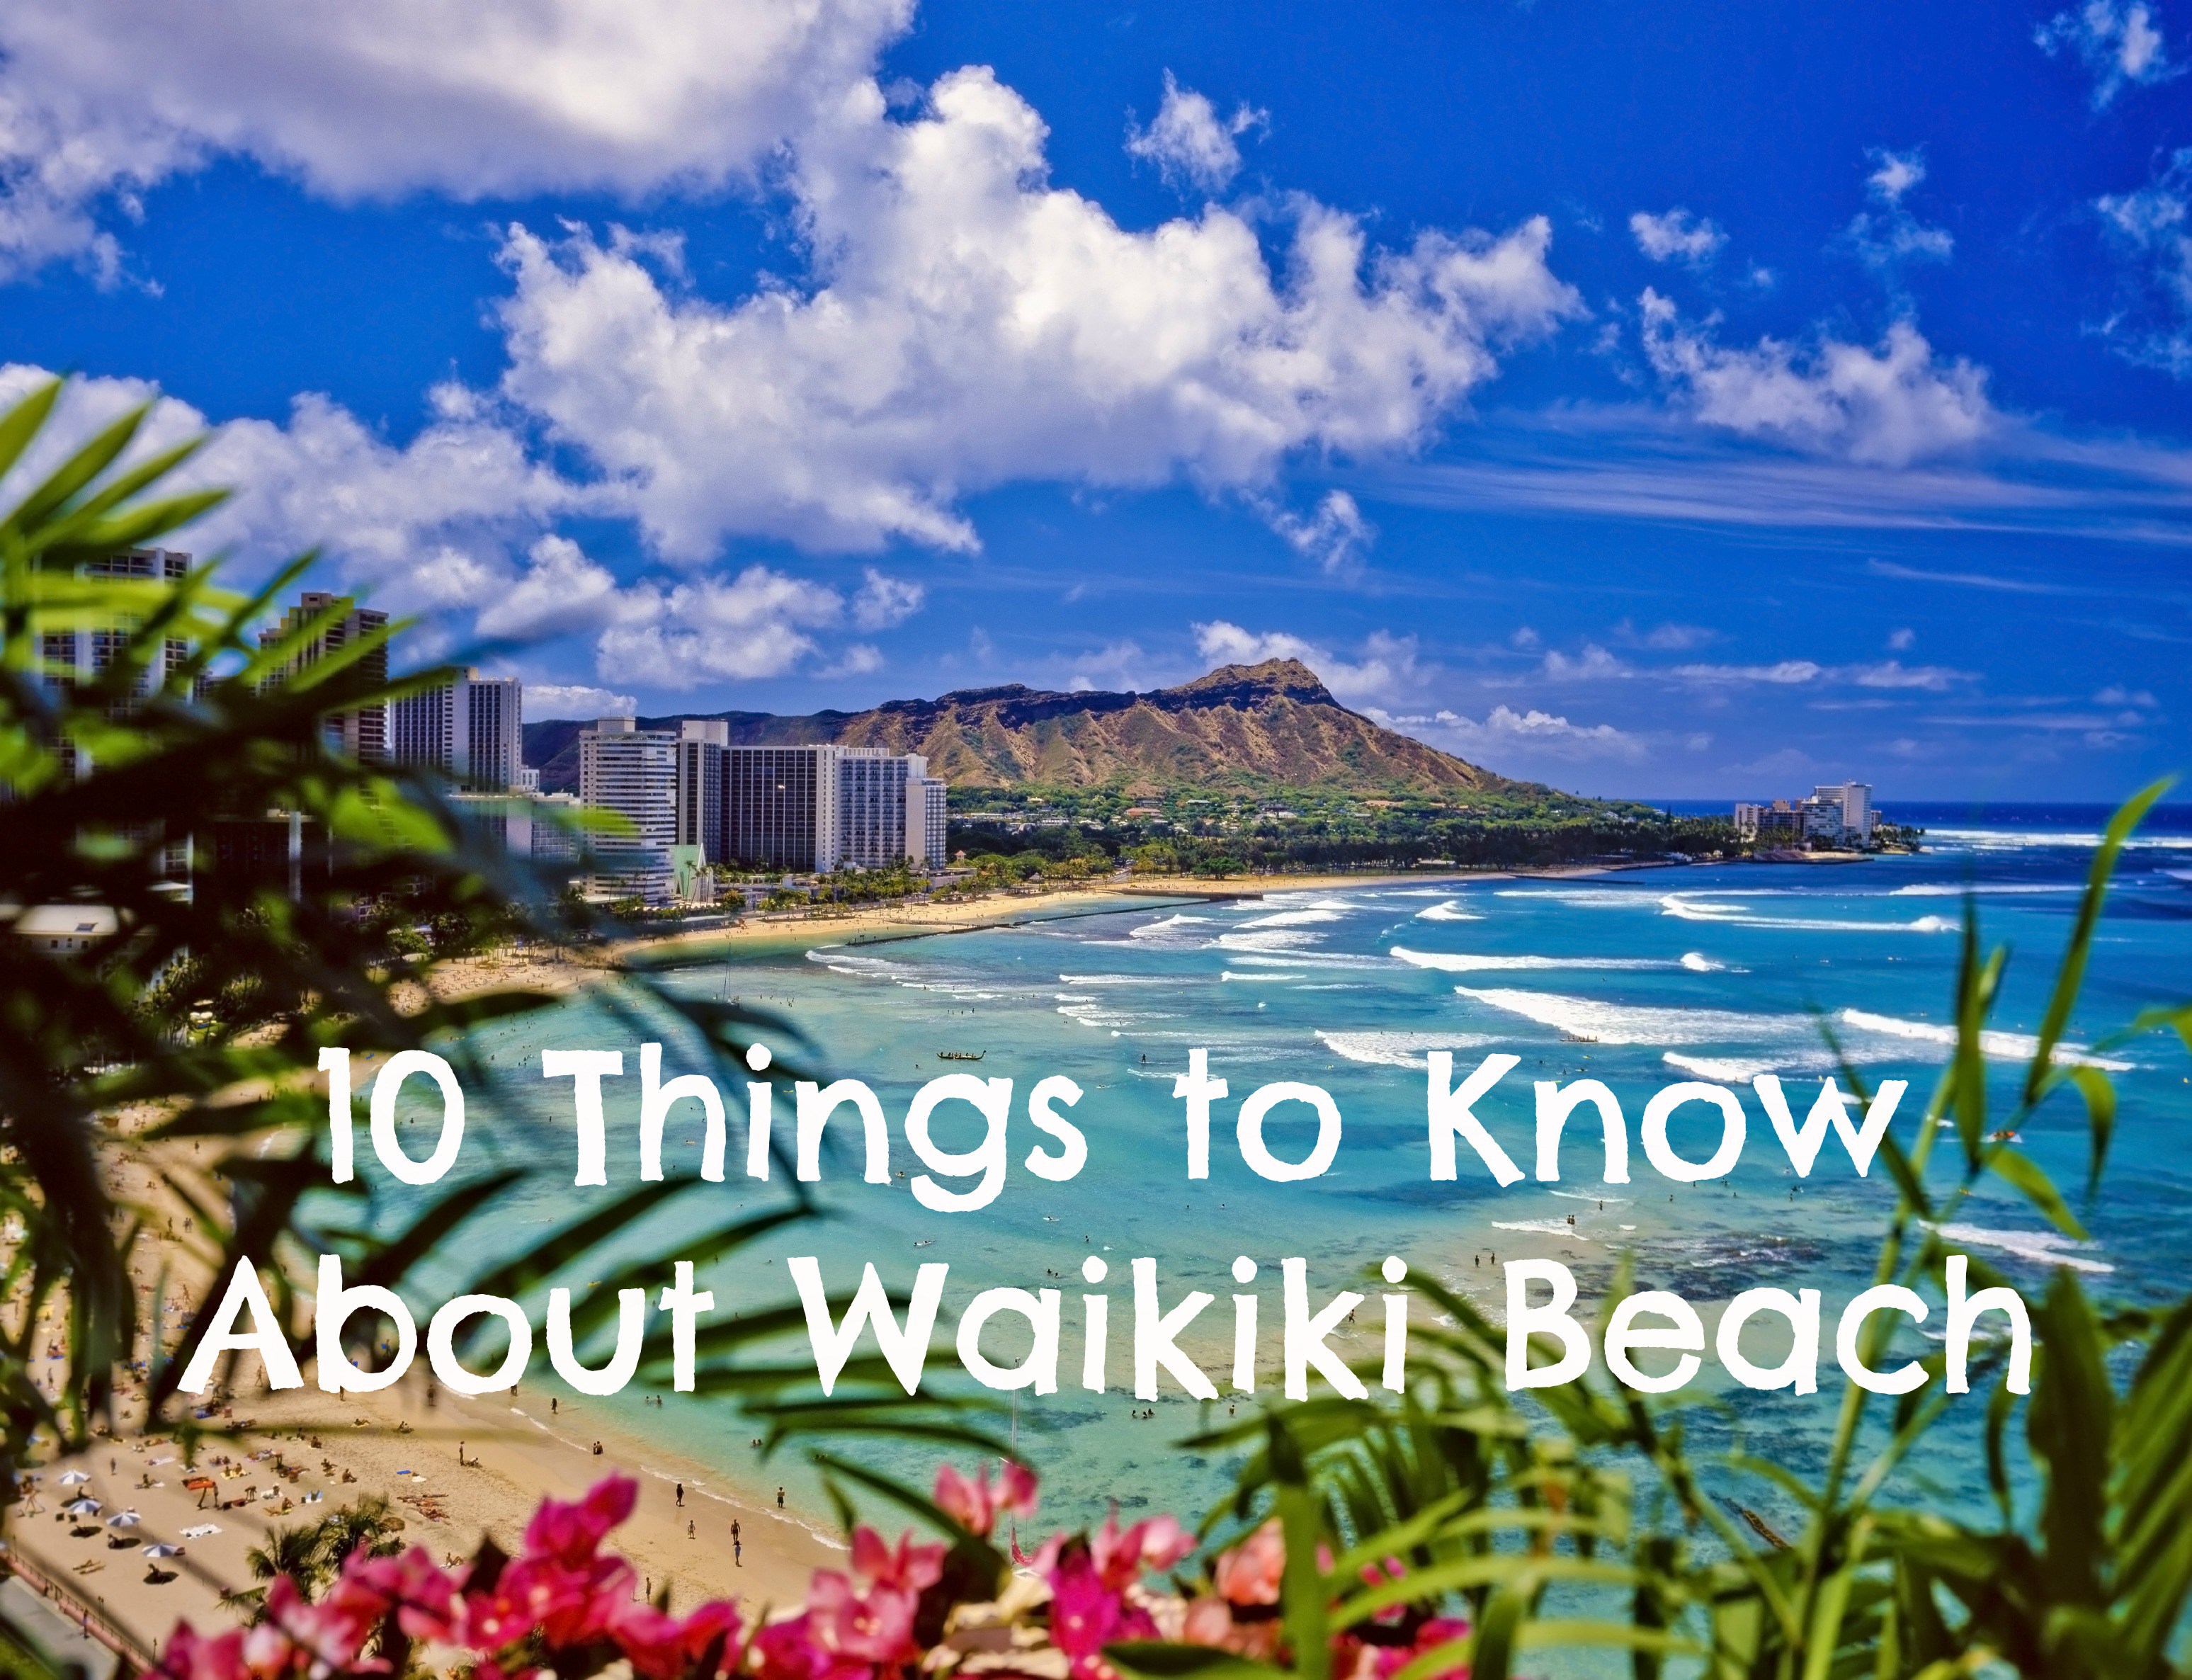 10 Things to Know about Waikiki Beach